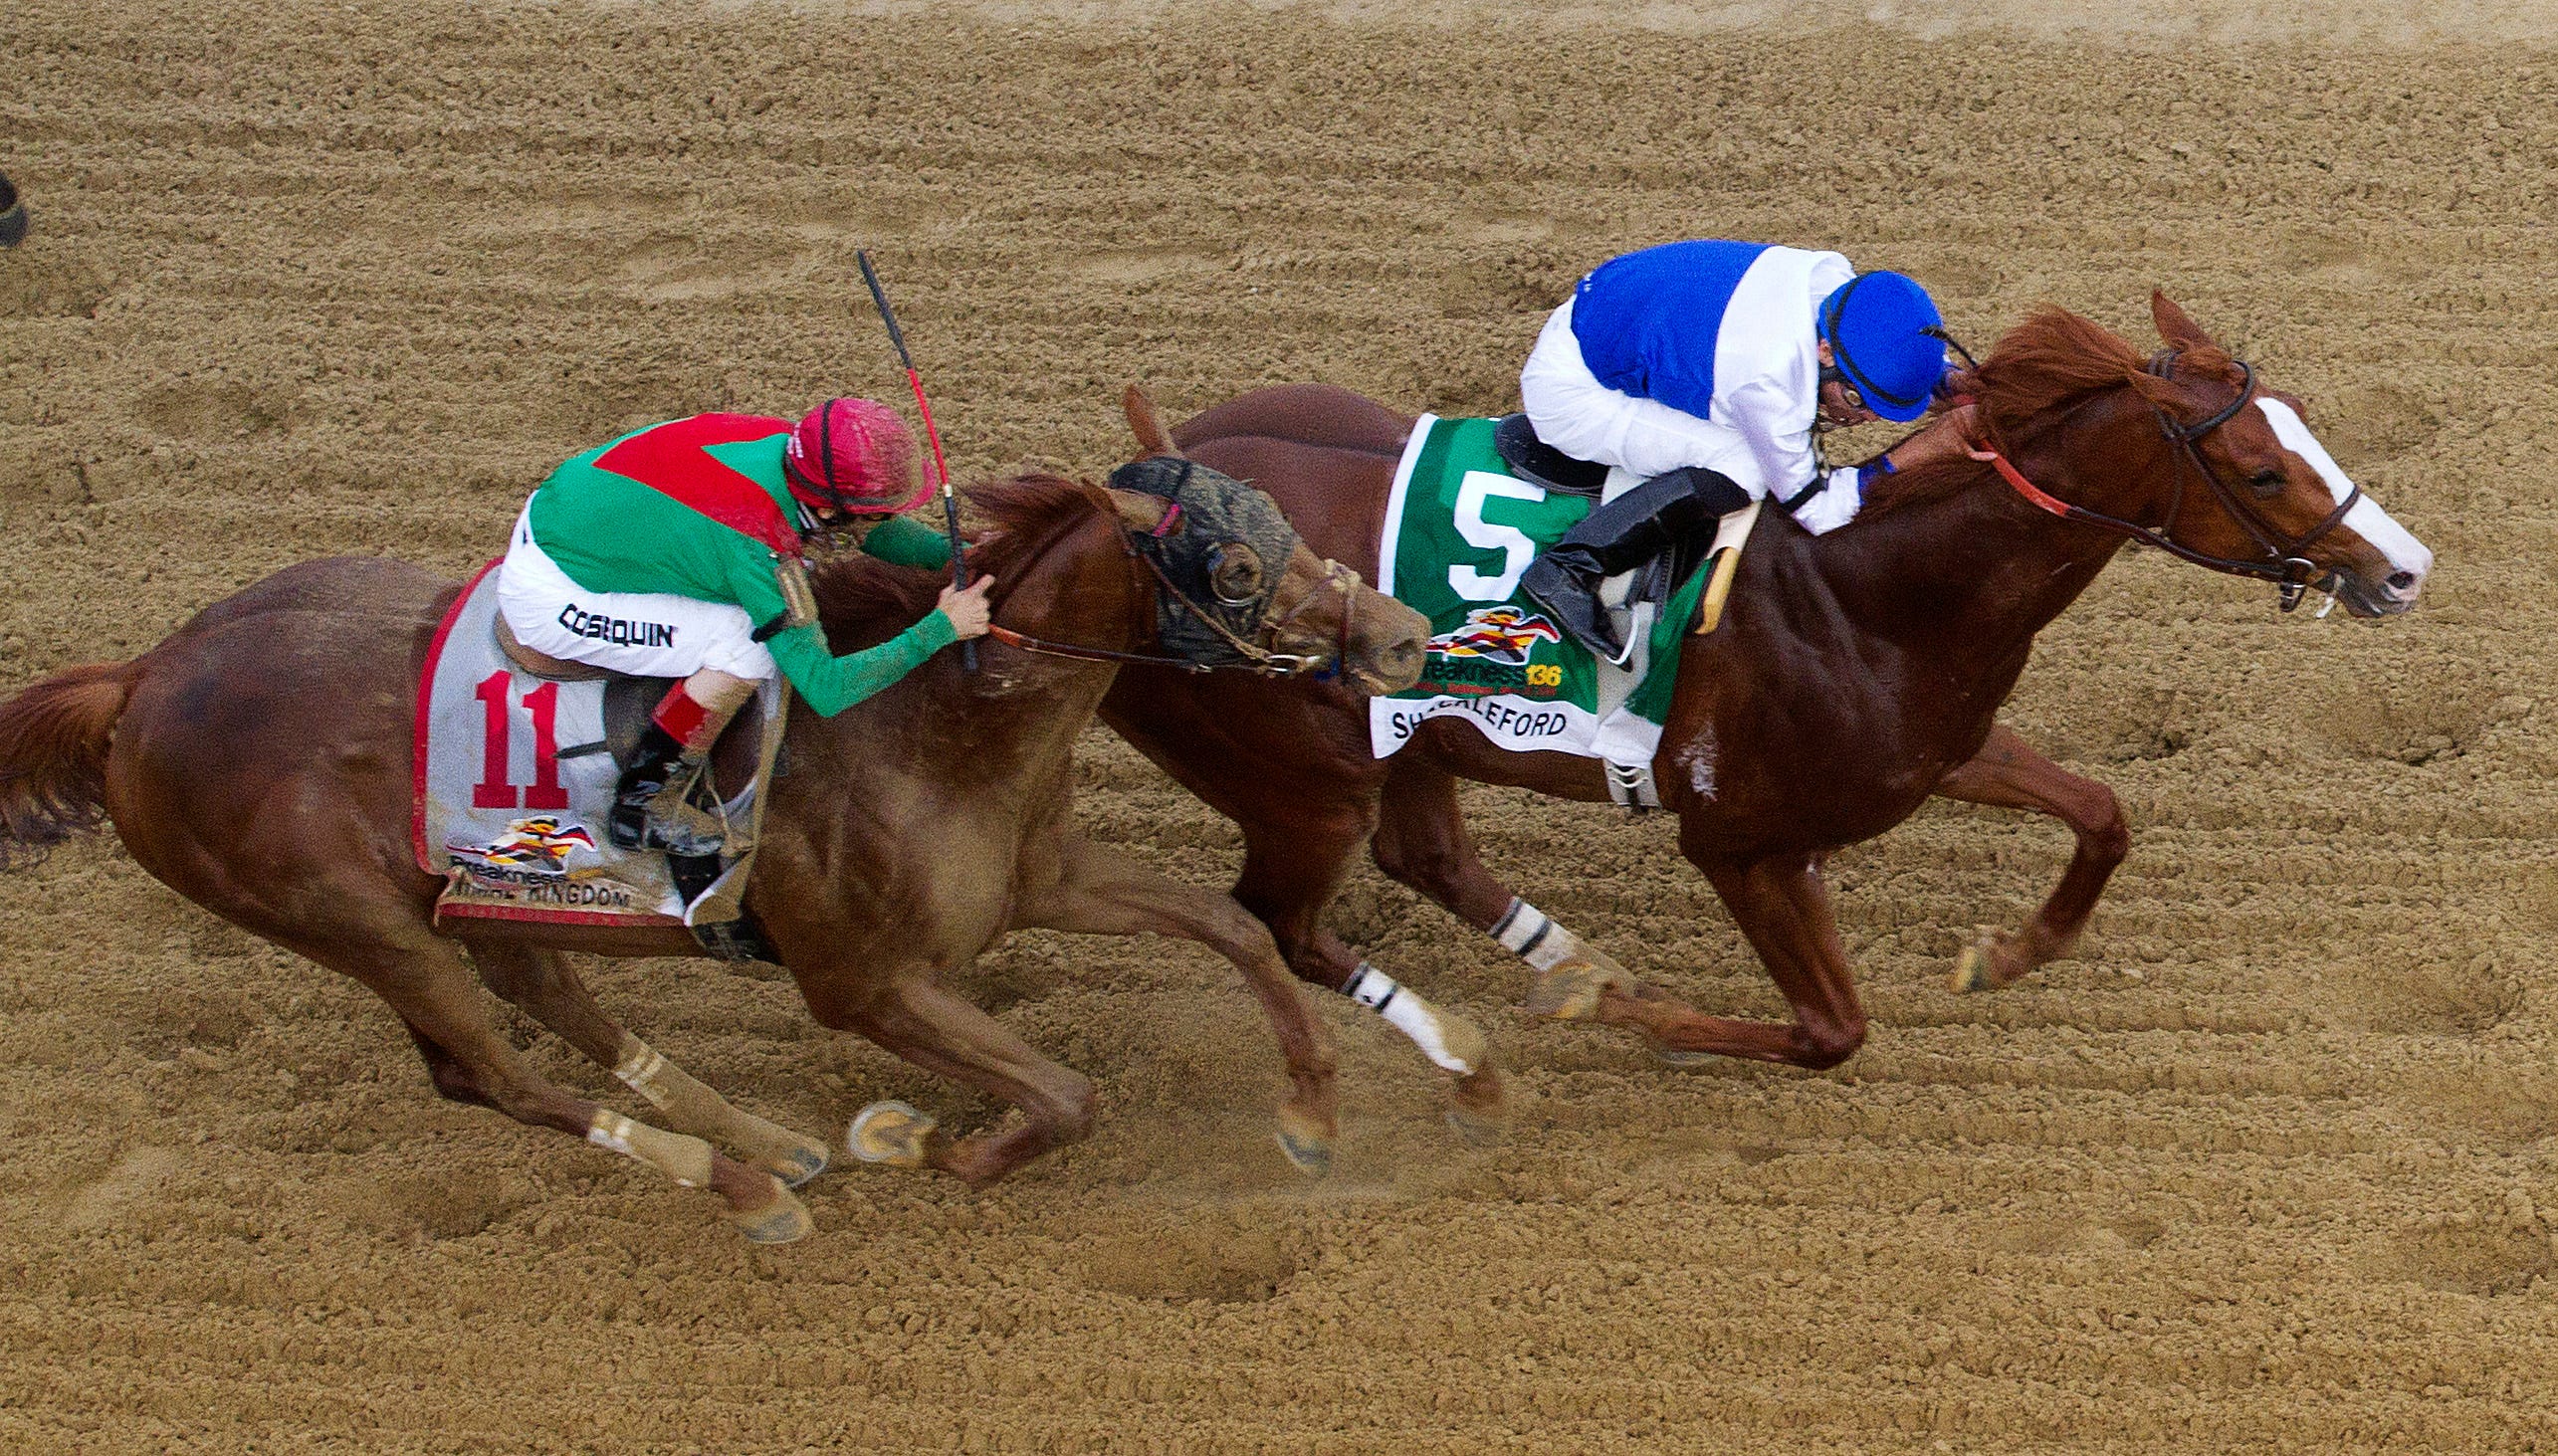 Horse racing's biggest rivalries | DRF WCMS